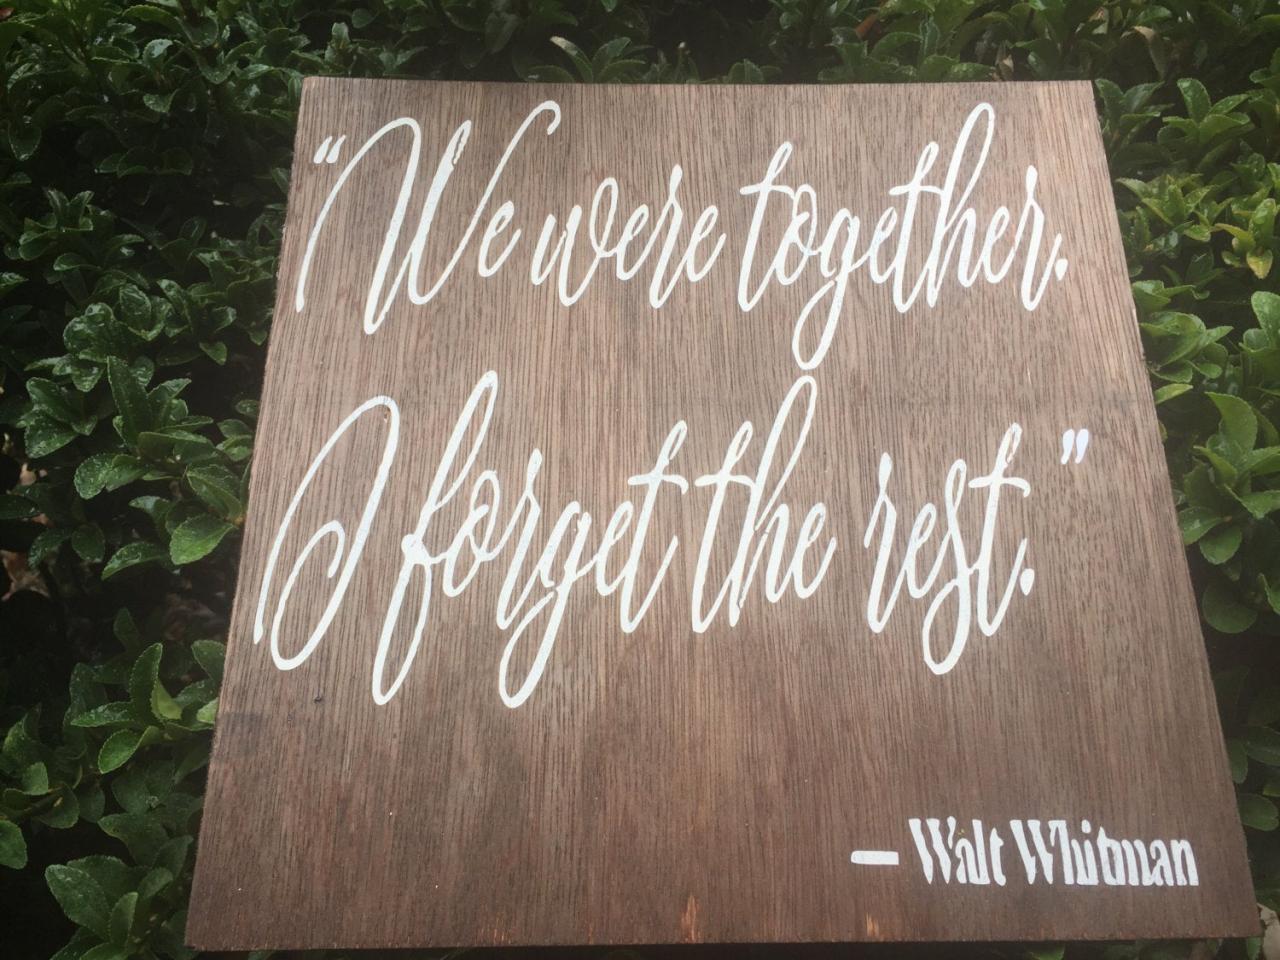 We Were Together. I Forget The Rest. 12x12 Hand Painted Wood Sign. Walt Whitman.